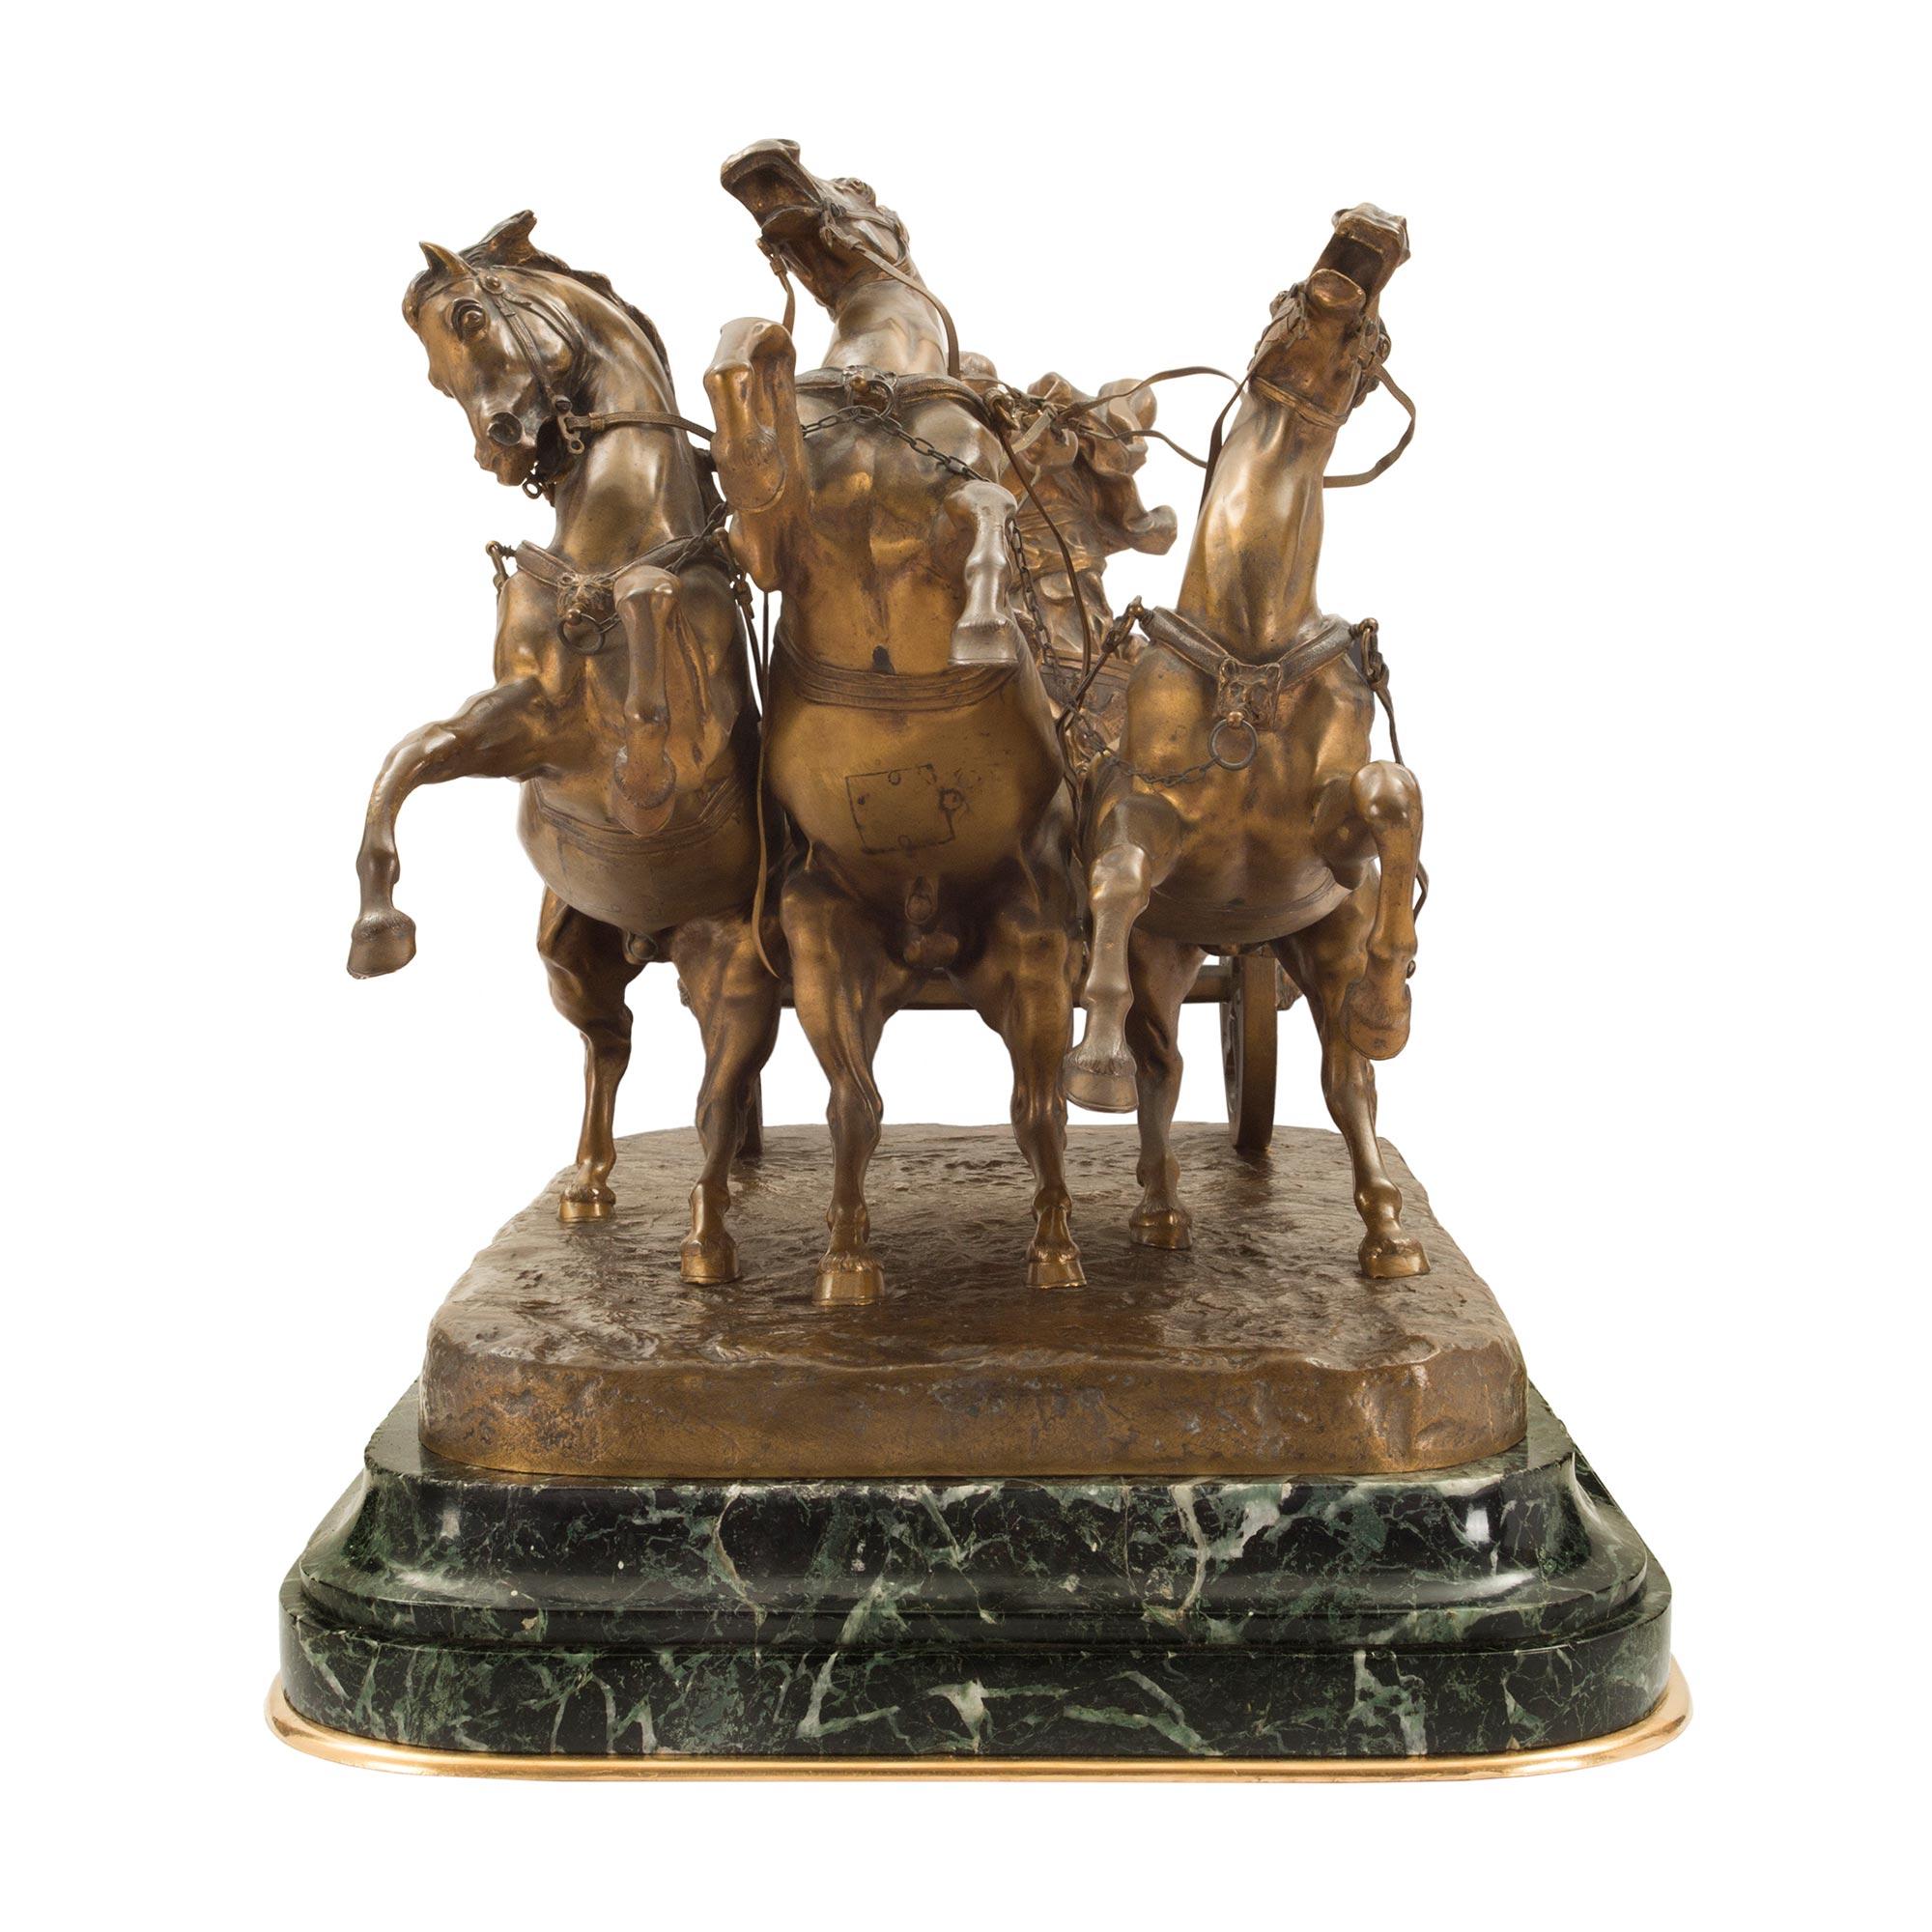 A stunning Italian 19th century patinated bronze and marble sculpture signed Vanetti. The statue is raised on a mottled rectangular Vert Patricia marble base with an elegant bottom ormolu band. Above is a most impressive Roman gladiator in classic